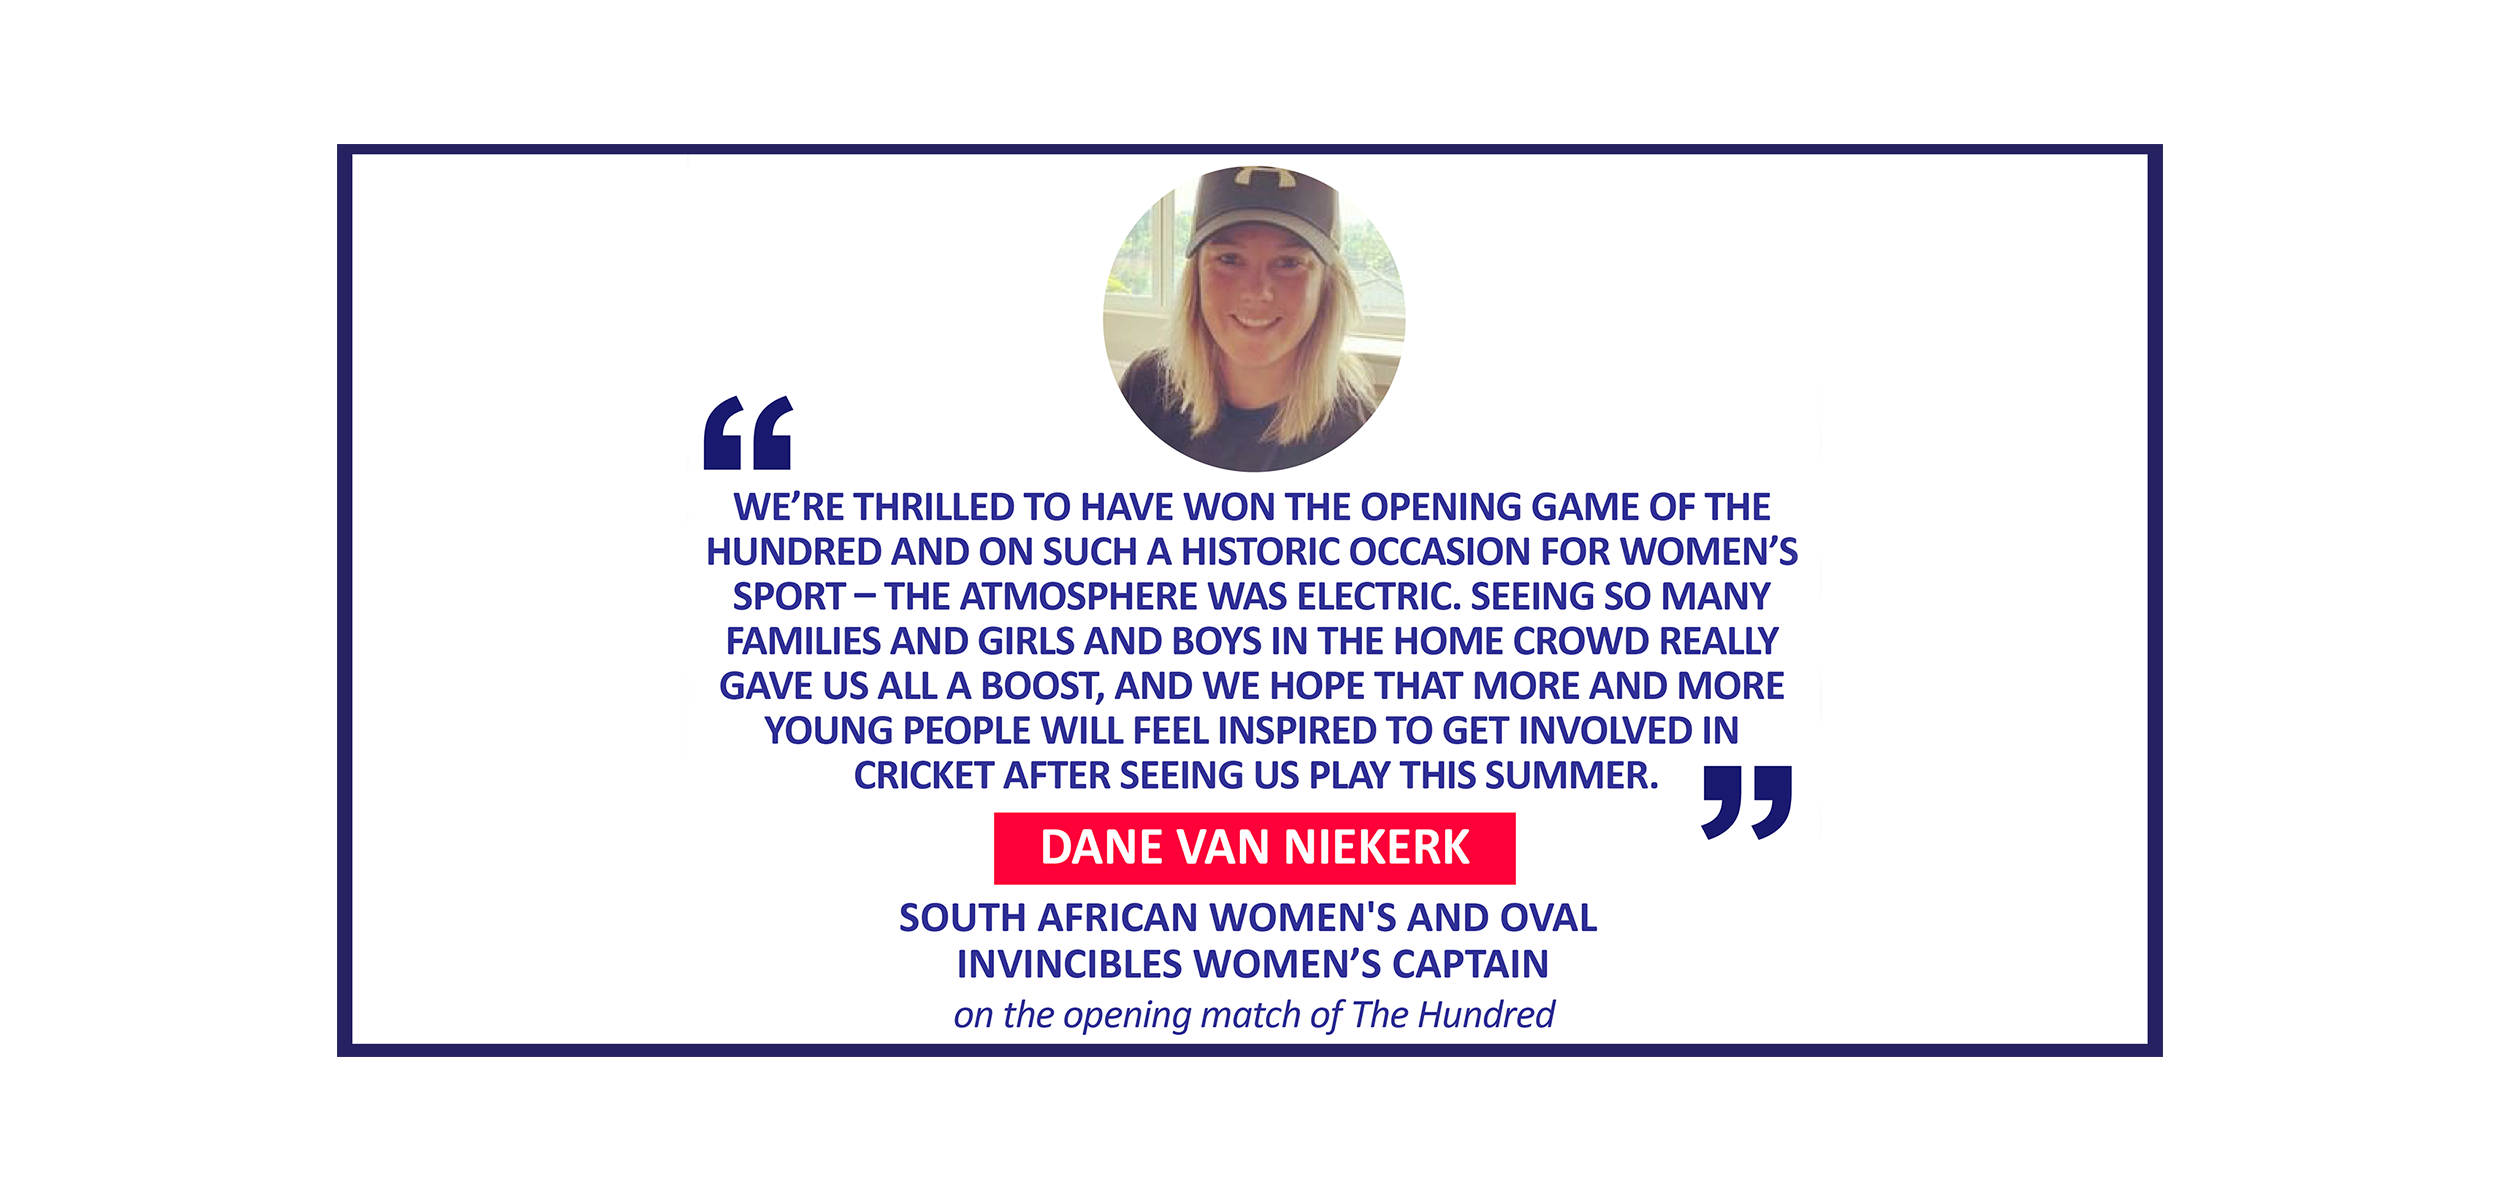 Dane van Niekerk, South African Women's and Oval Invincibles Women’s Captain on the opening match of The Hundred